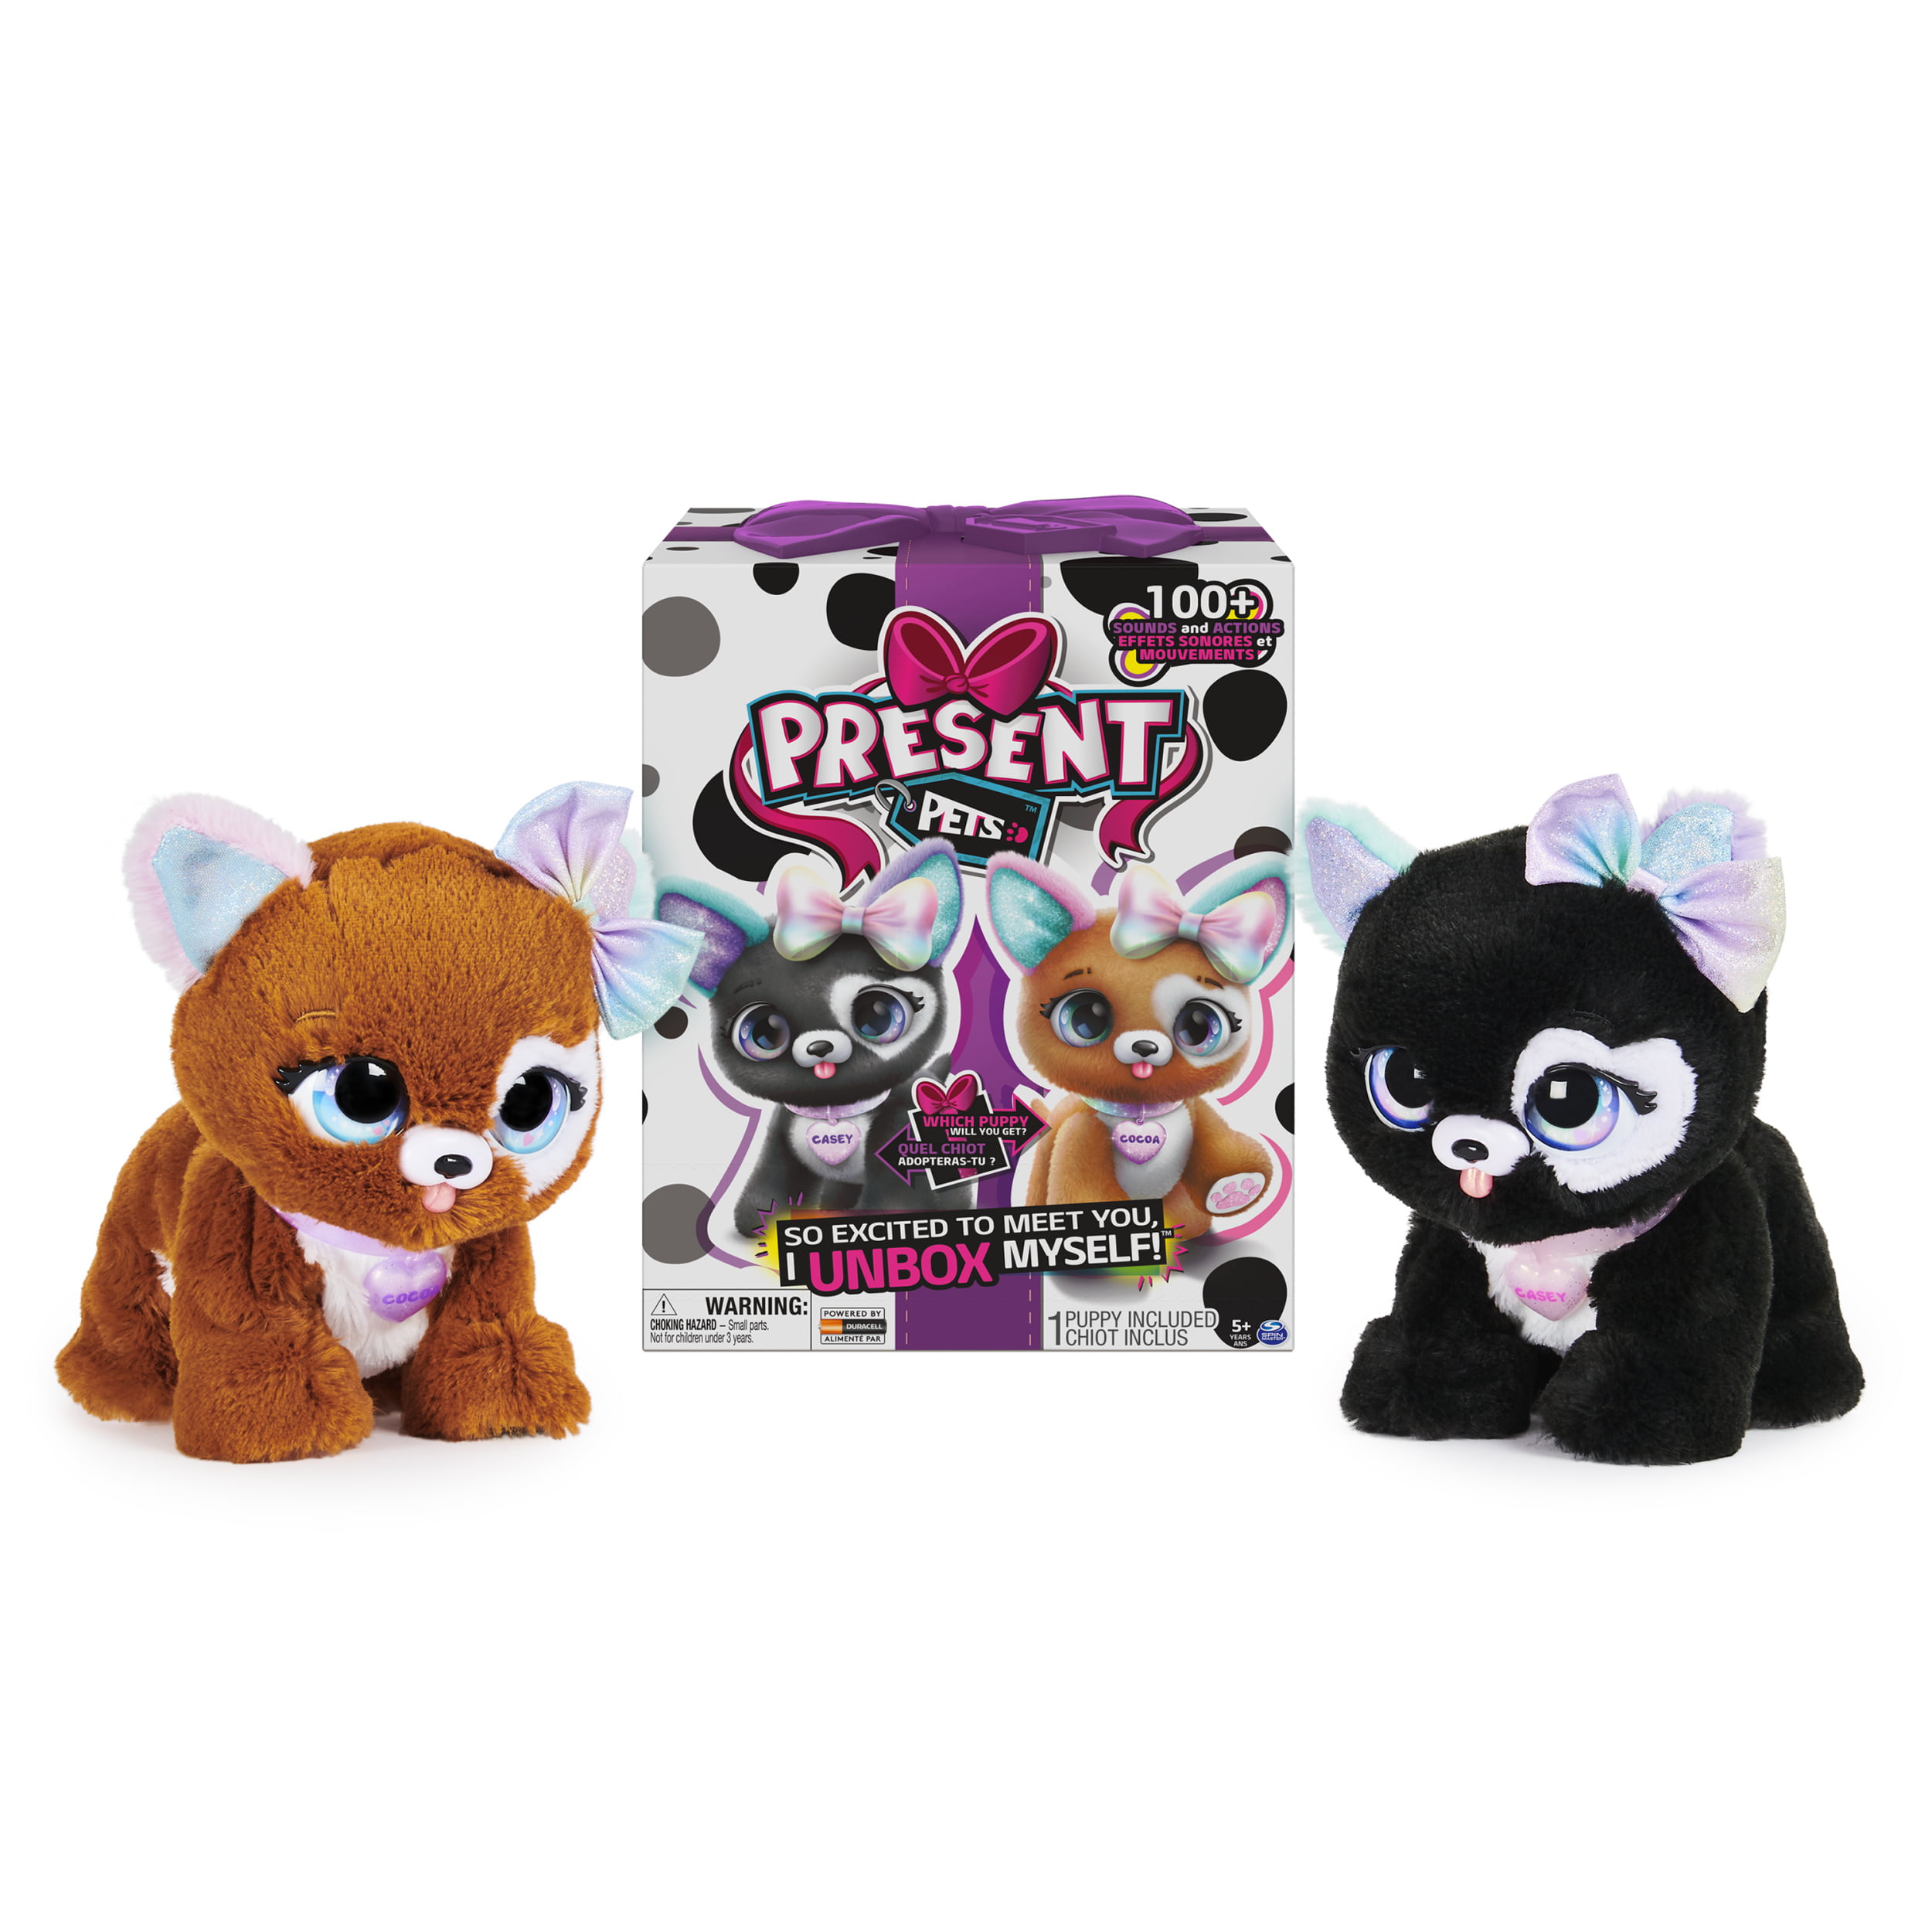 Present Pets Glitter Puppy Interactive Plush Pet Toy With Over 100 Sounds and a for sale online